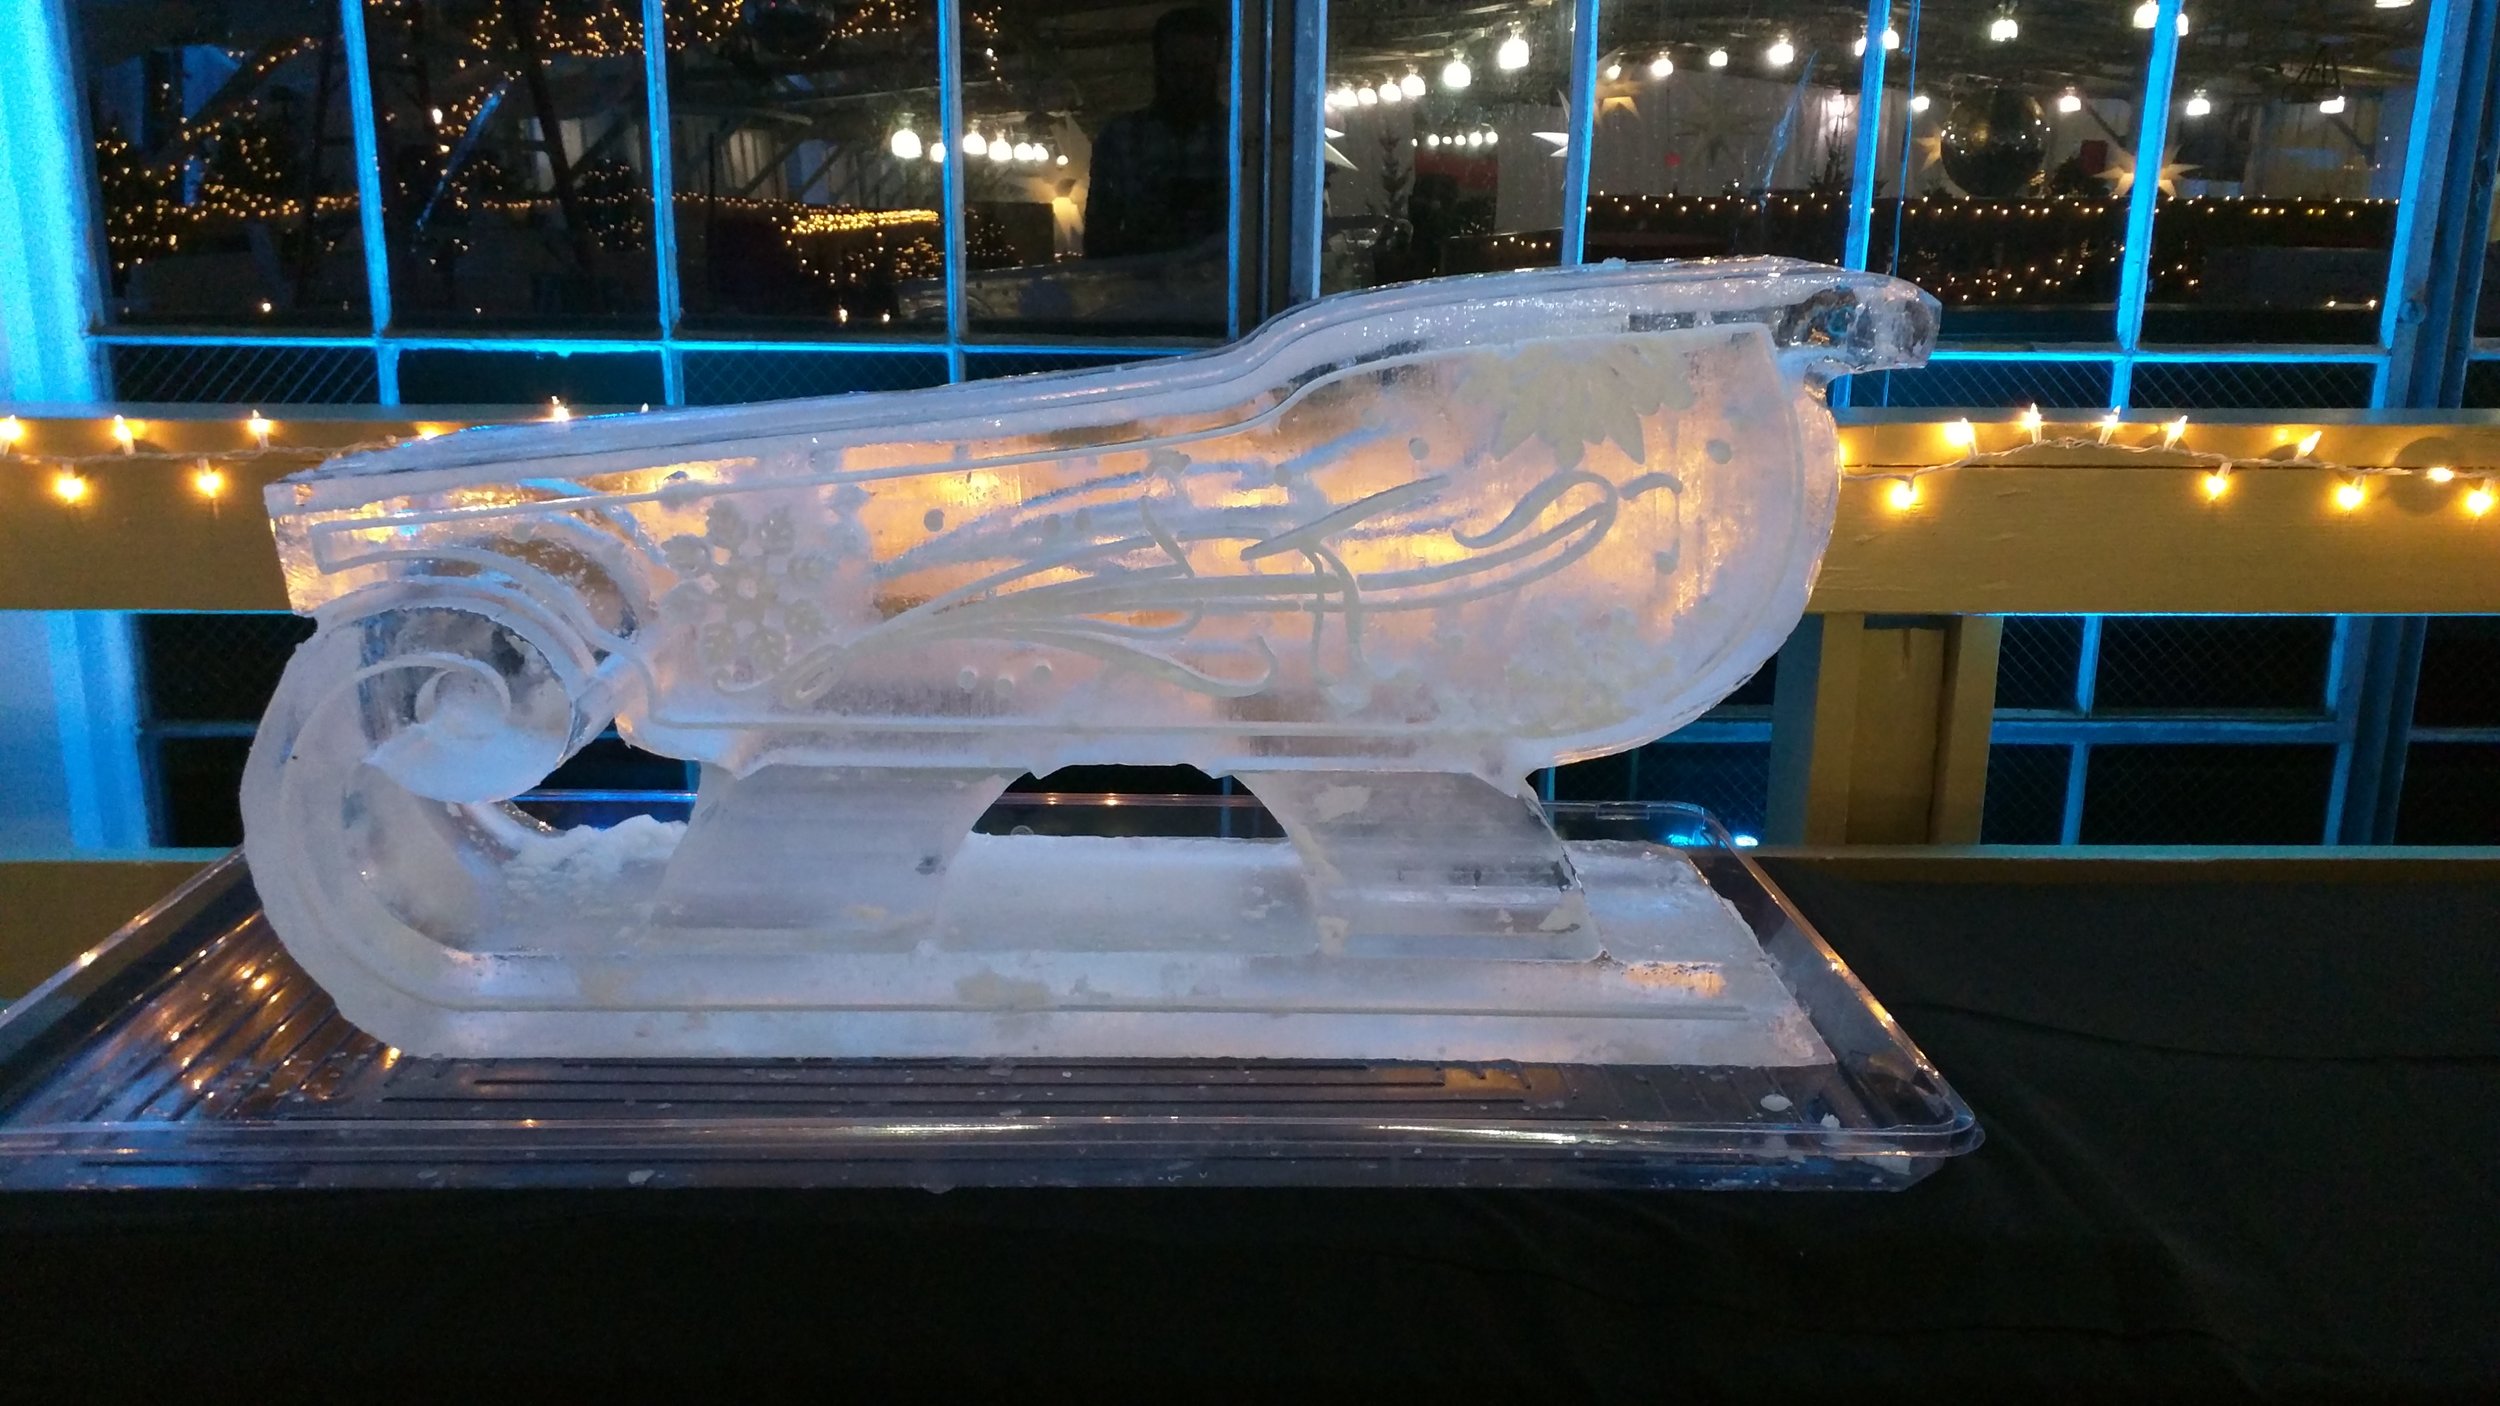 Chicago Winter Holiday Polar Bear Ice Sculpture Luge